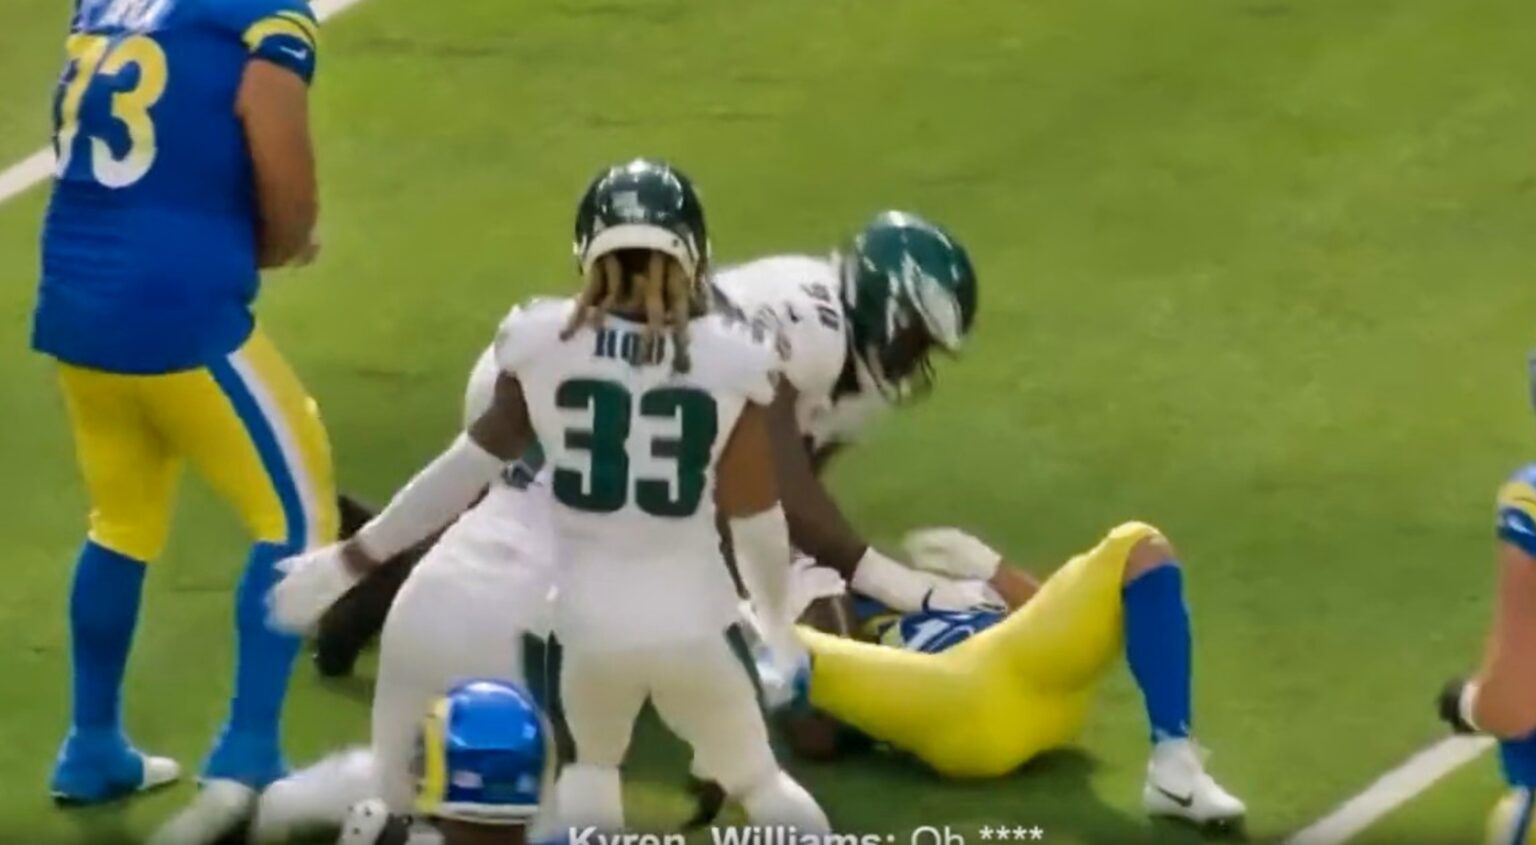 Rams RB Kyren Williams Caught On Hot Mic Saying “OH SH*T” After Being Hit by an Eagles Jordan Davis